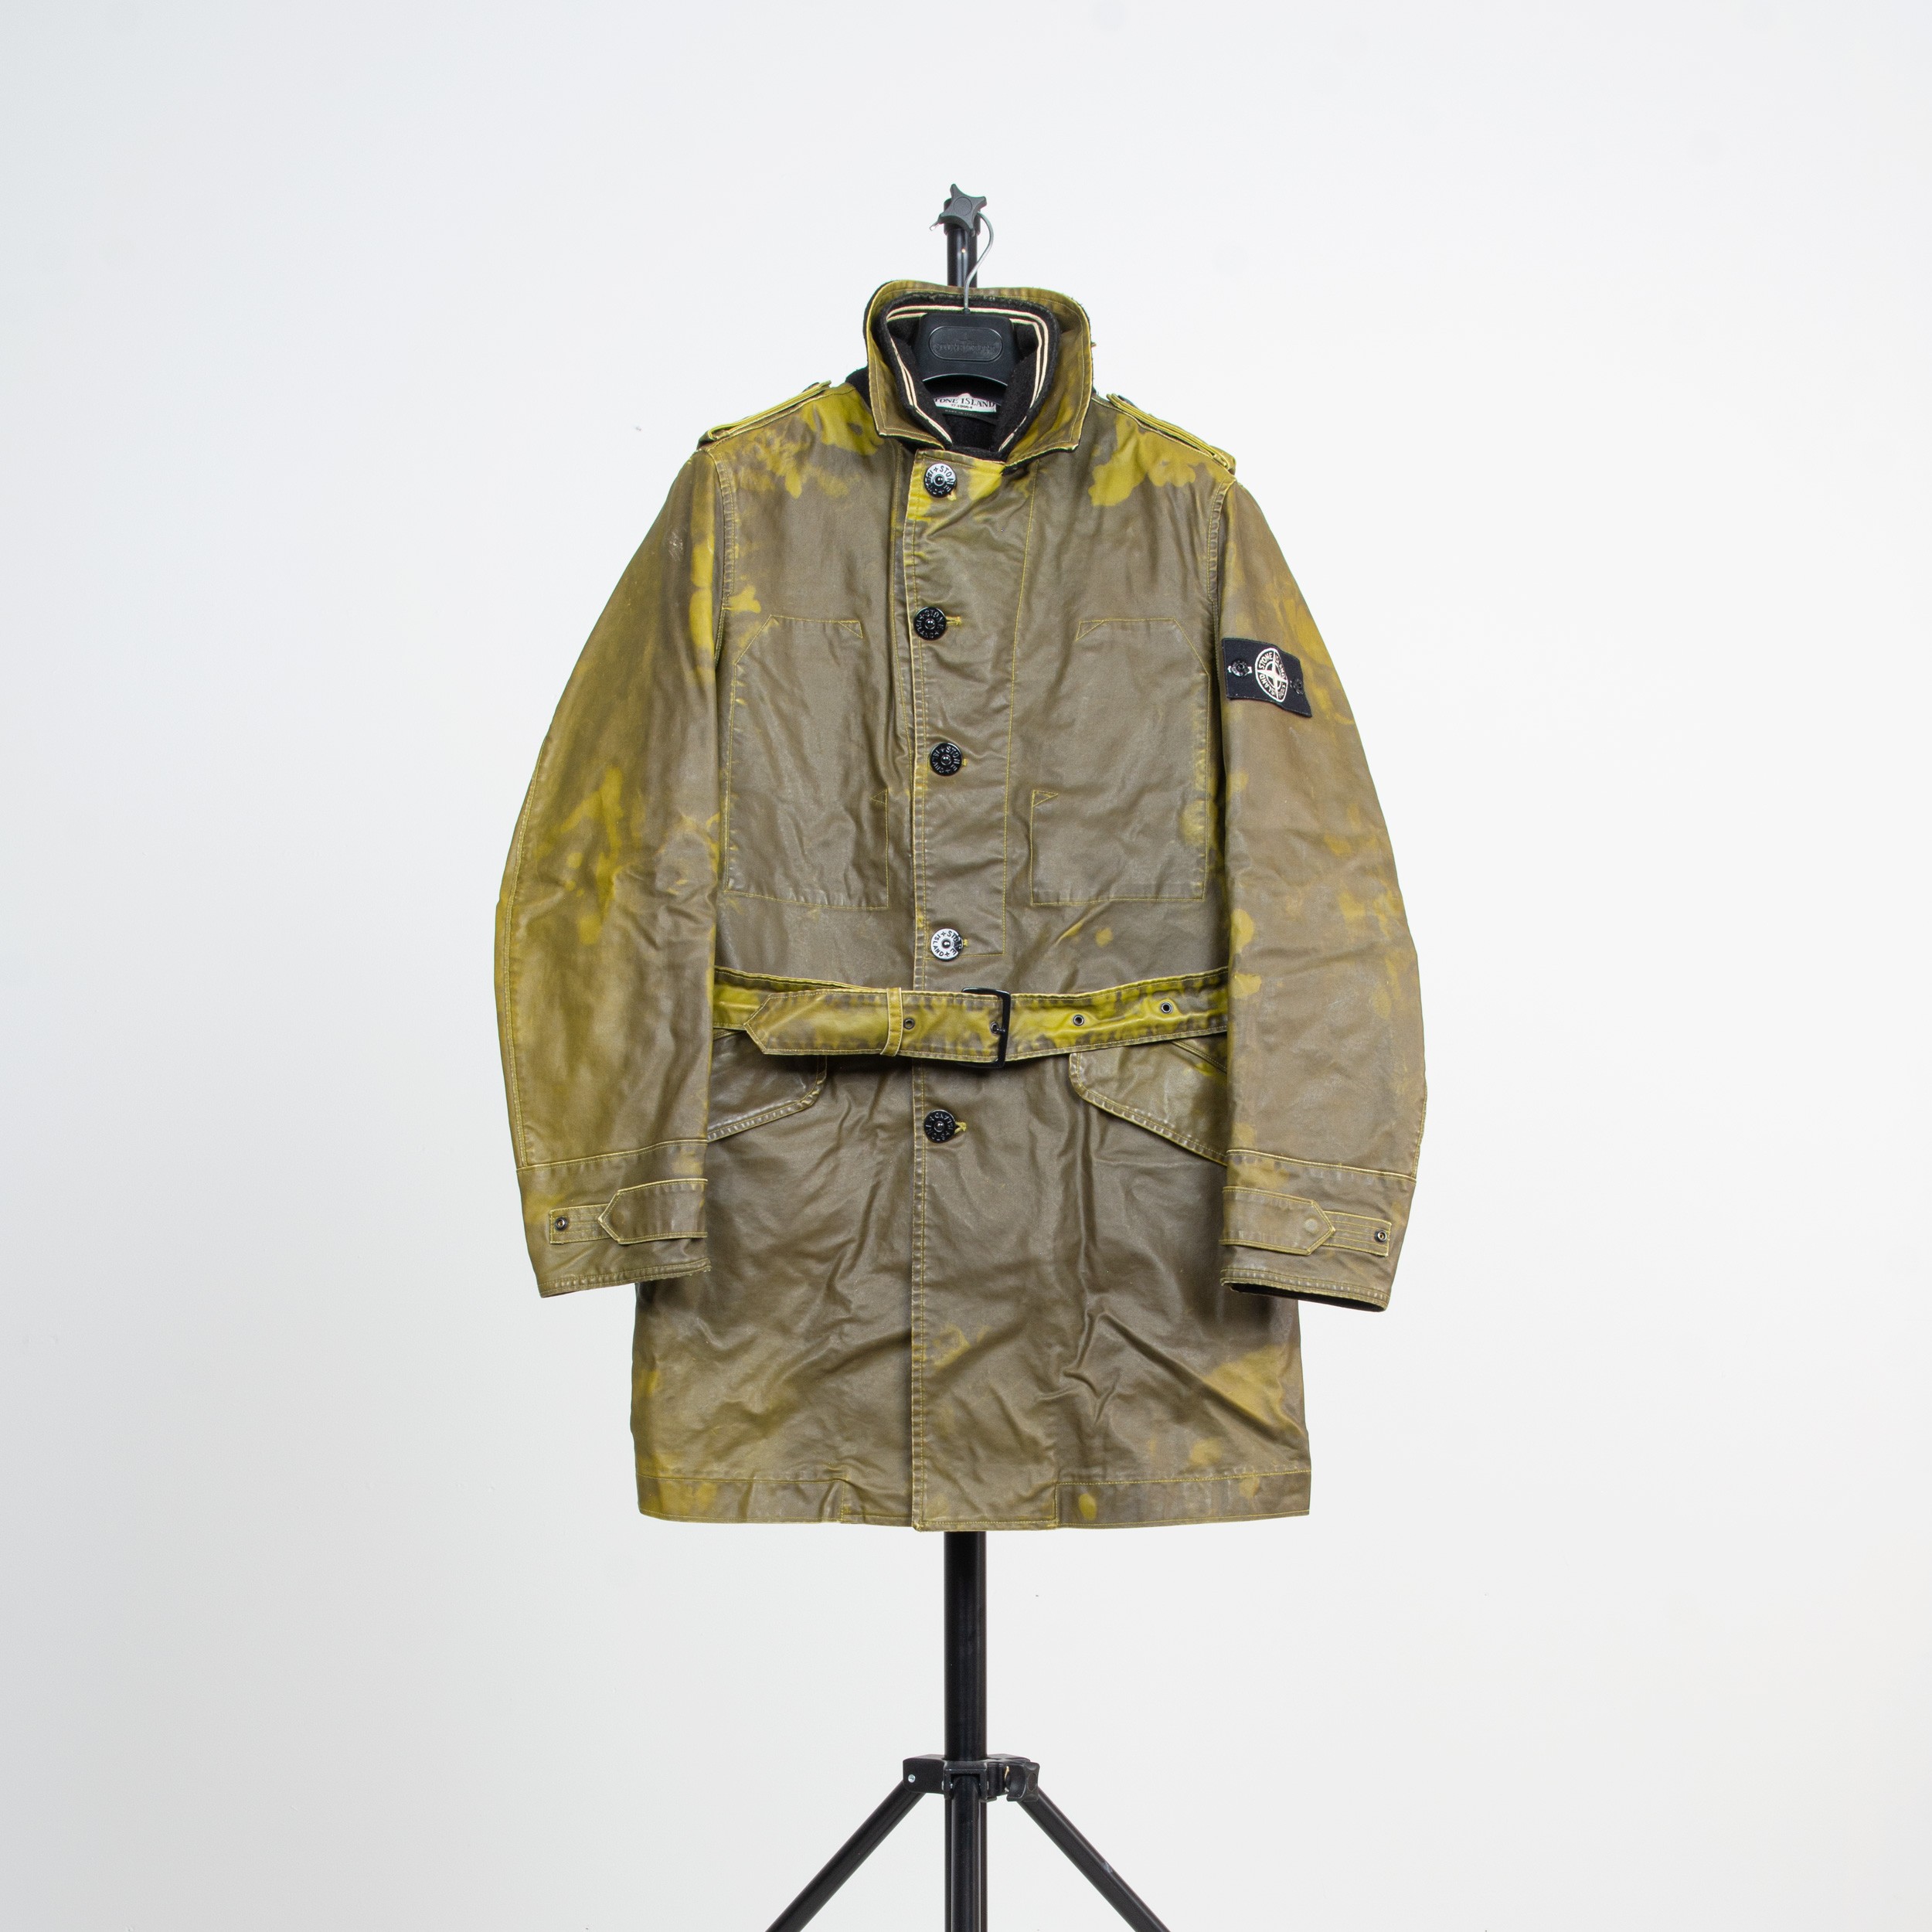 RE-POCKETS STONE ISLAND Waxed Ice Belted Jacket With Dutch Rope Dark Olive